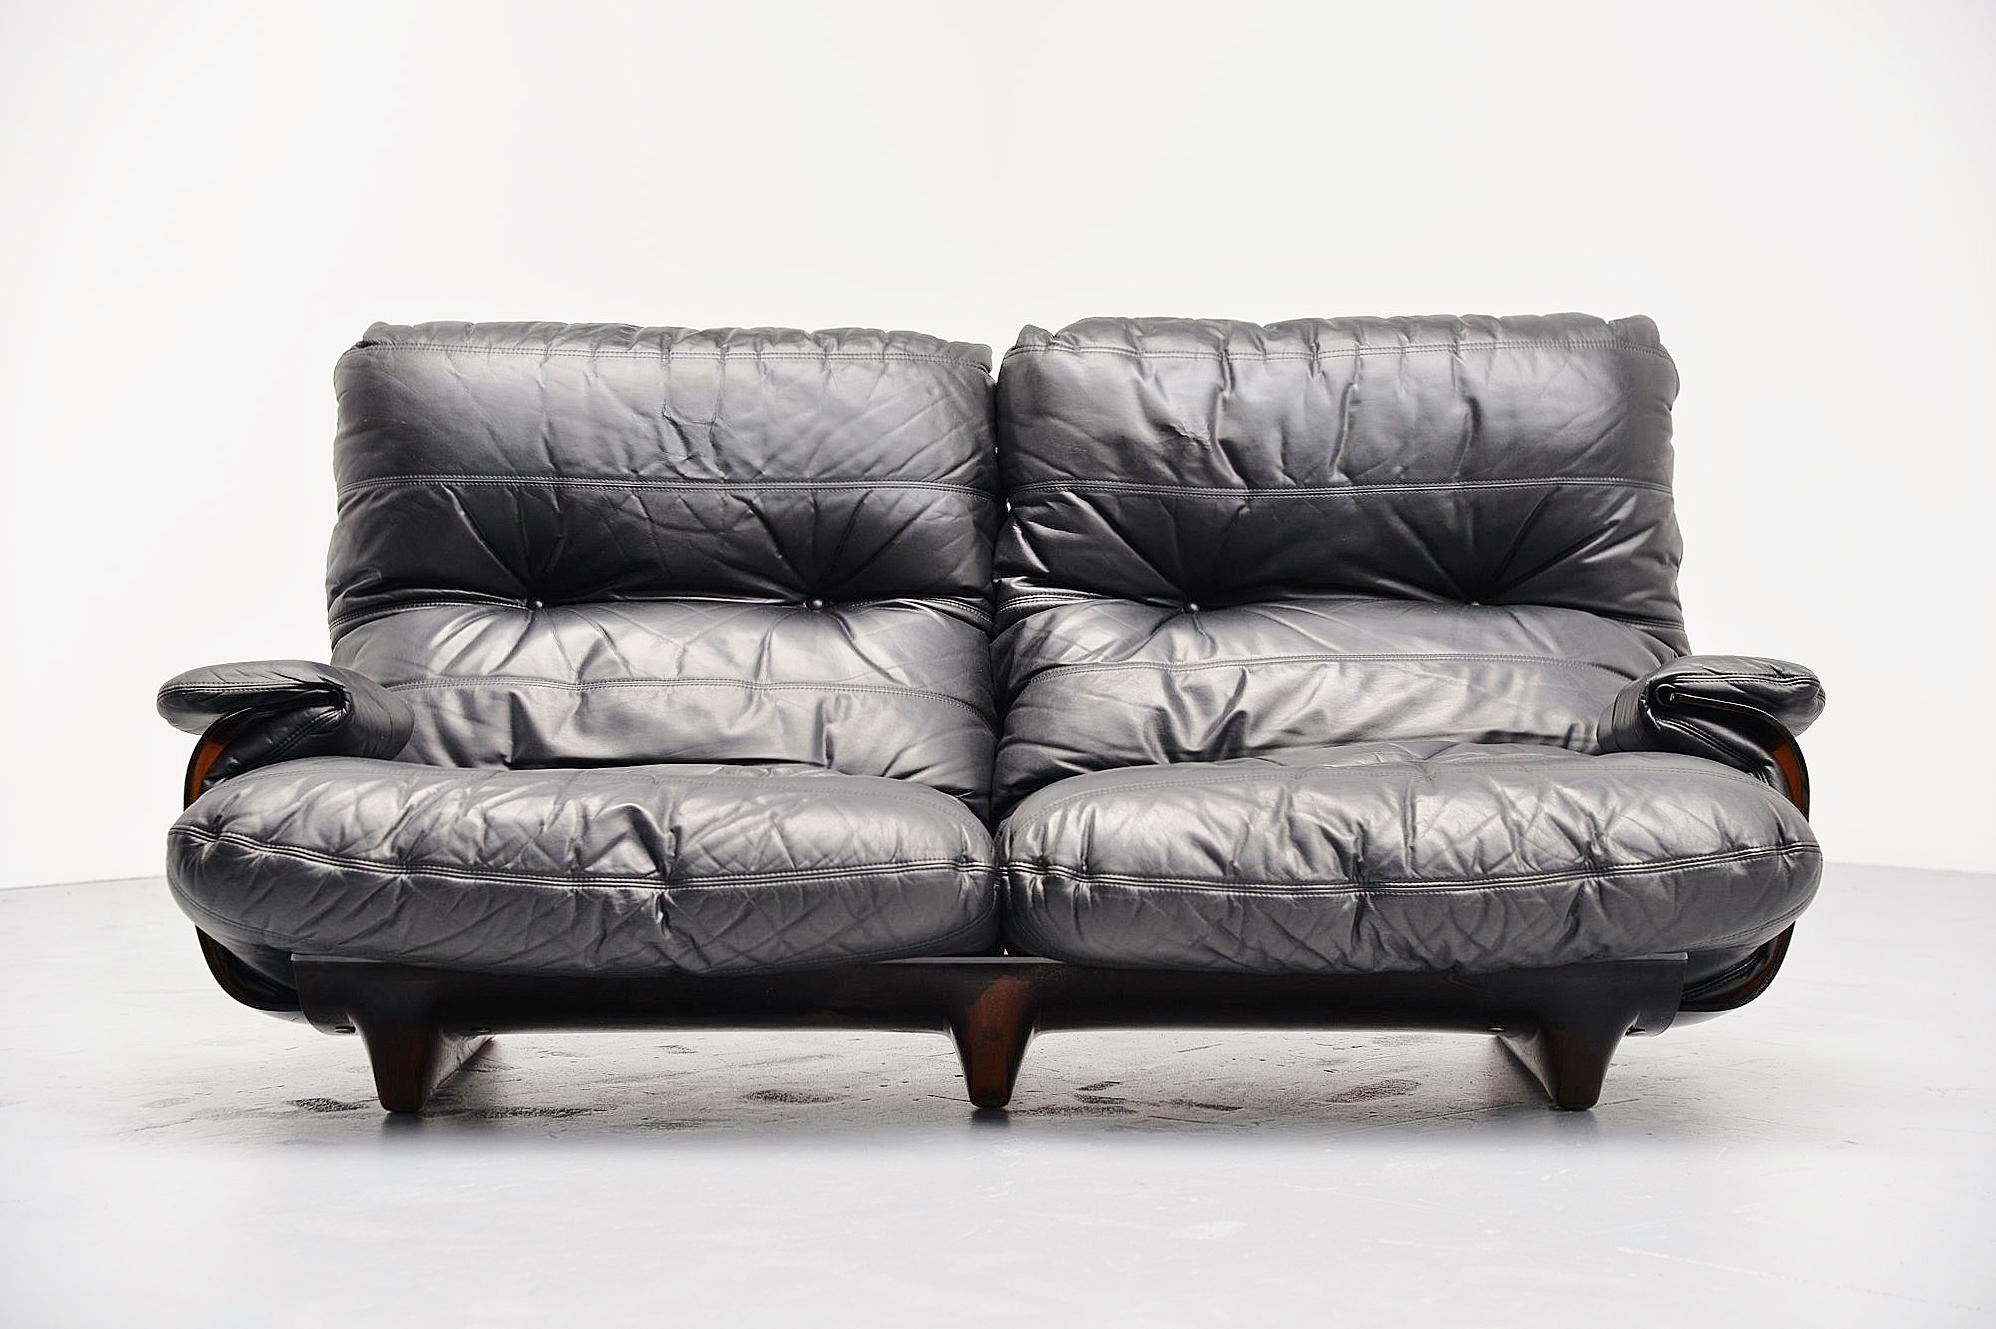 Large lounge sofa designed by Michel Ducaroy, manufactured by Ligne Roset, France, 1970. This is from the Marsala series and this has a brown Plexiglas base and very cozy black leather cushions. Super comfortable lounge sofa in high quality leather.